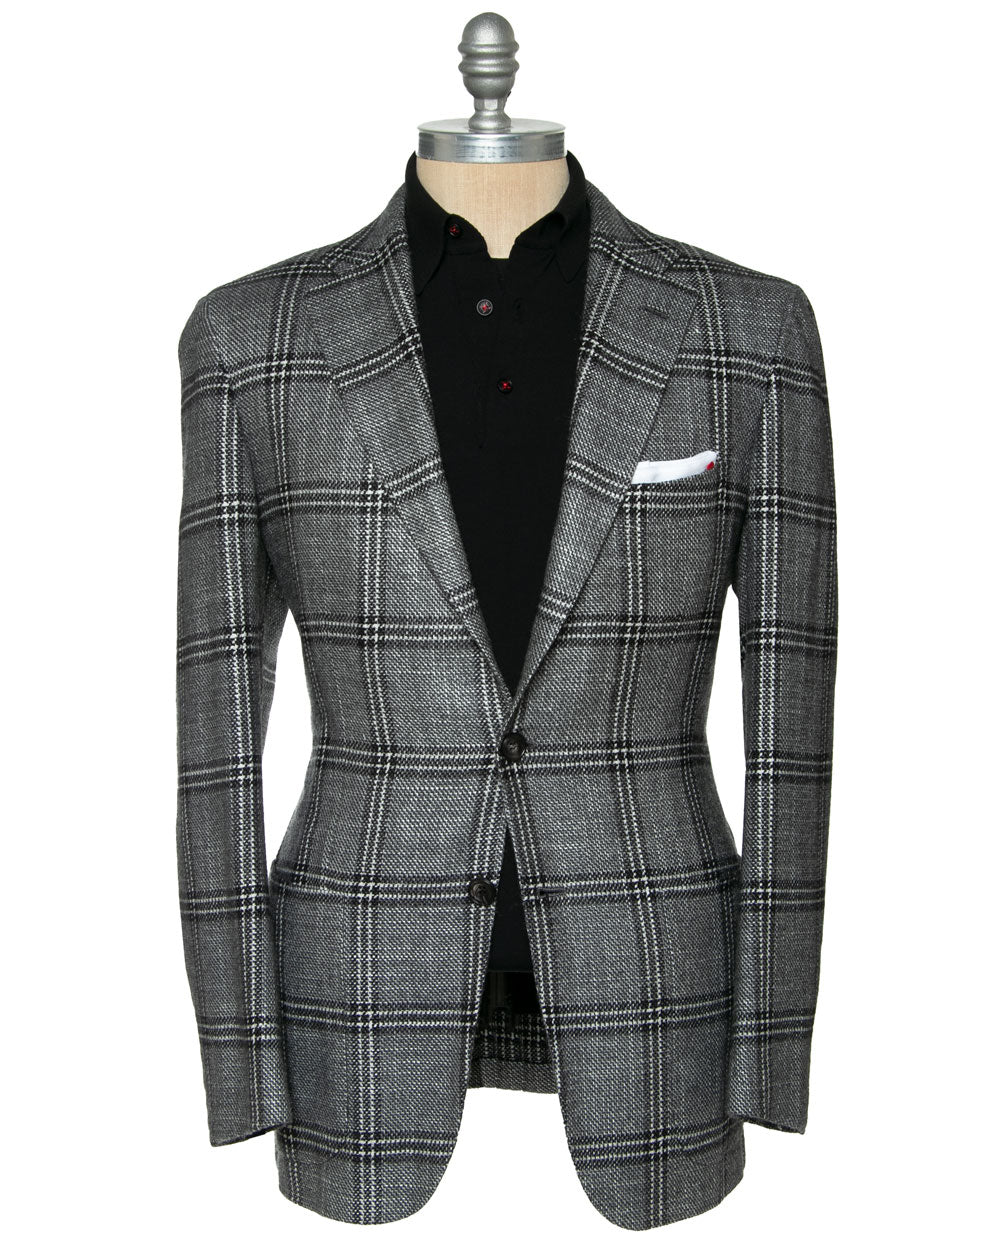 Grey and Charcoal Plaid Cashmere Silk Sportcoat